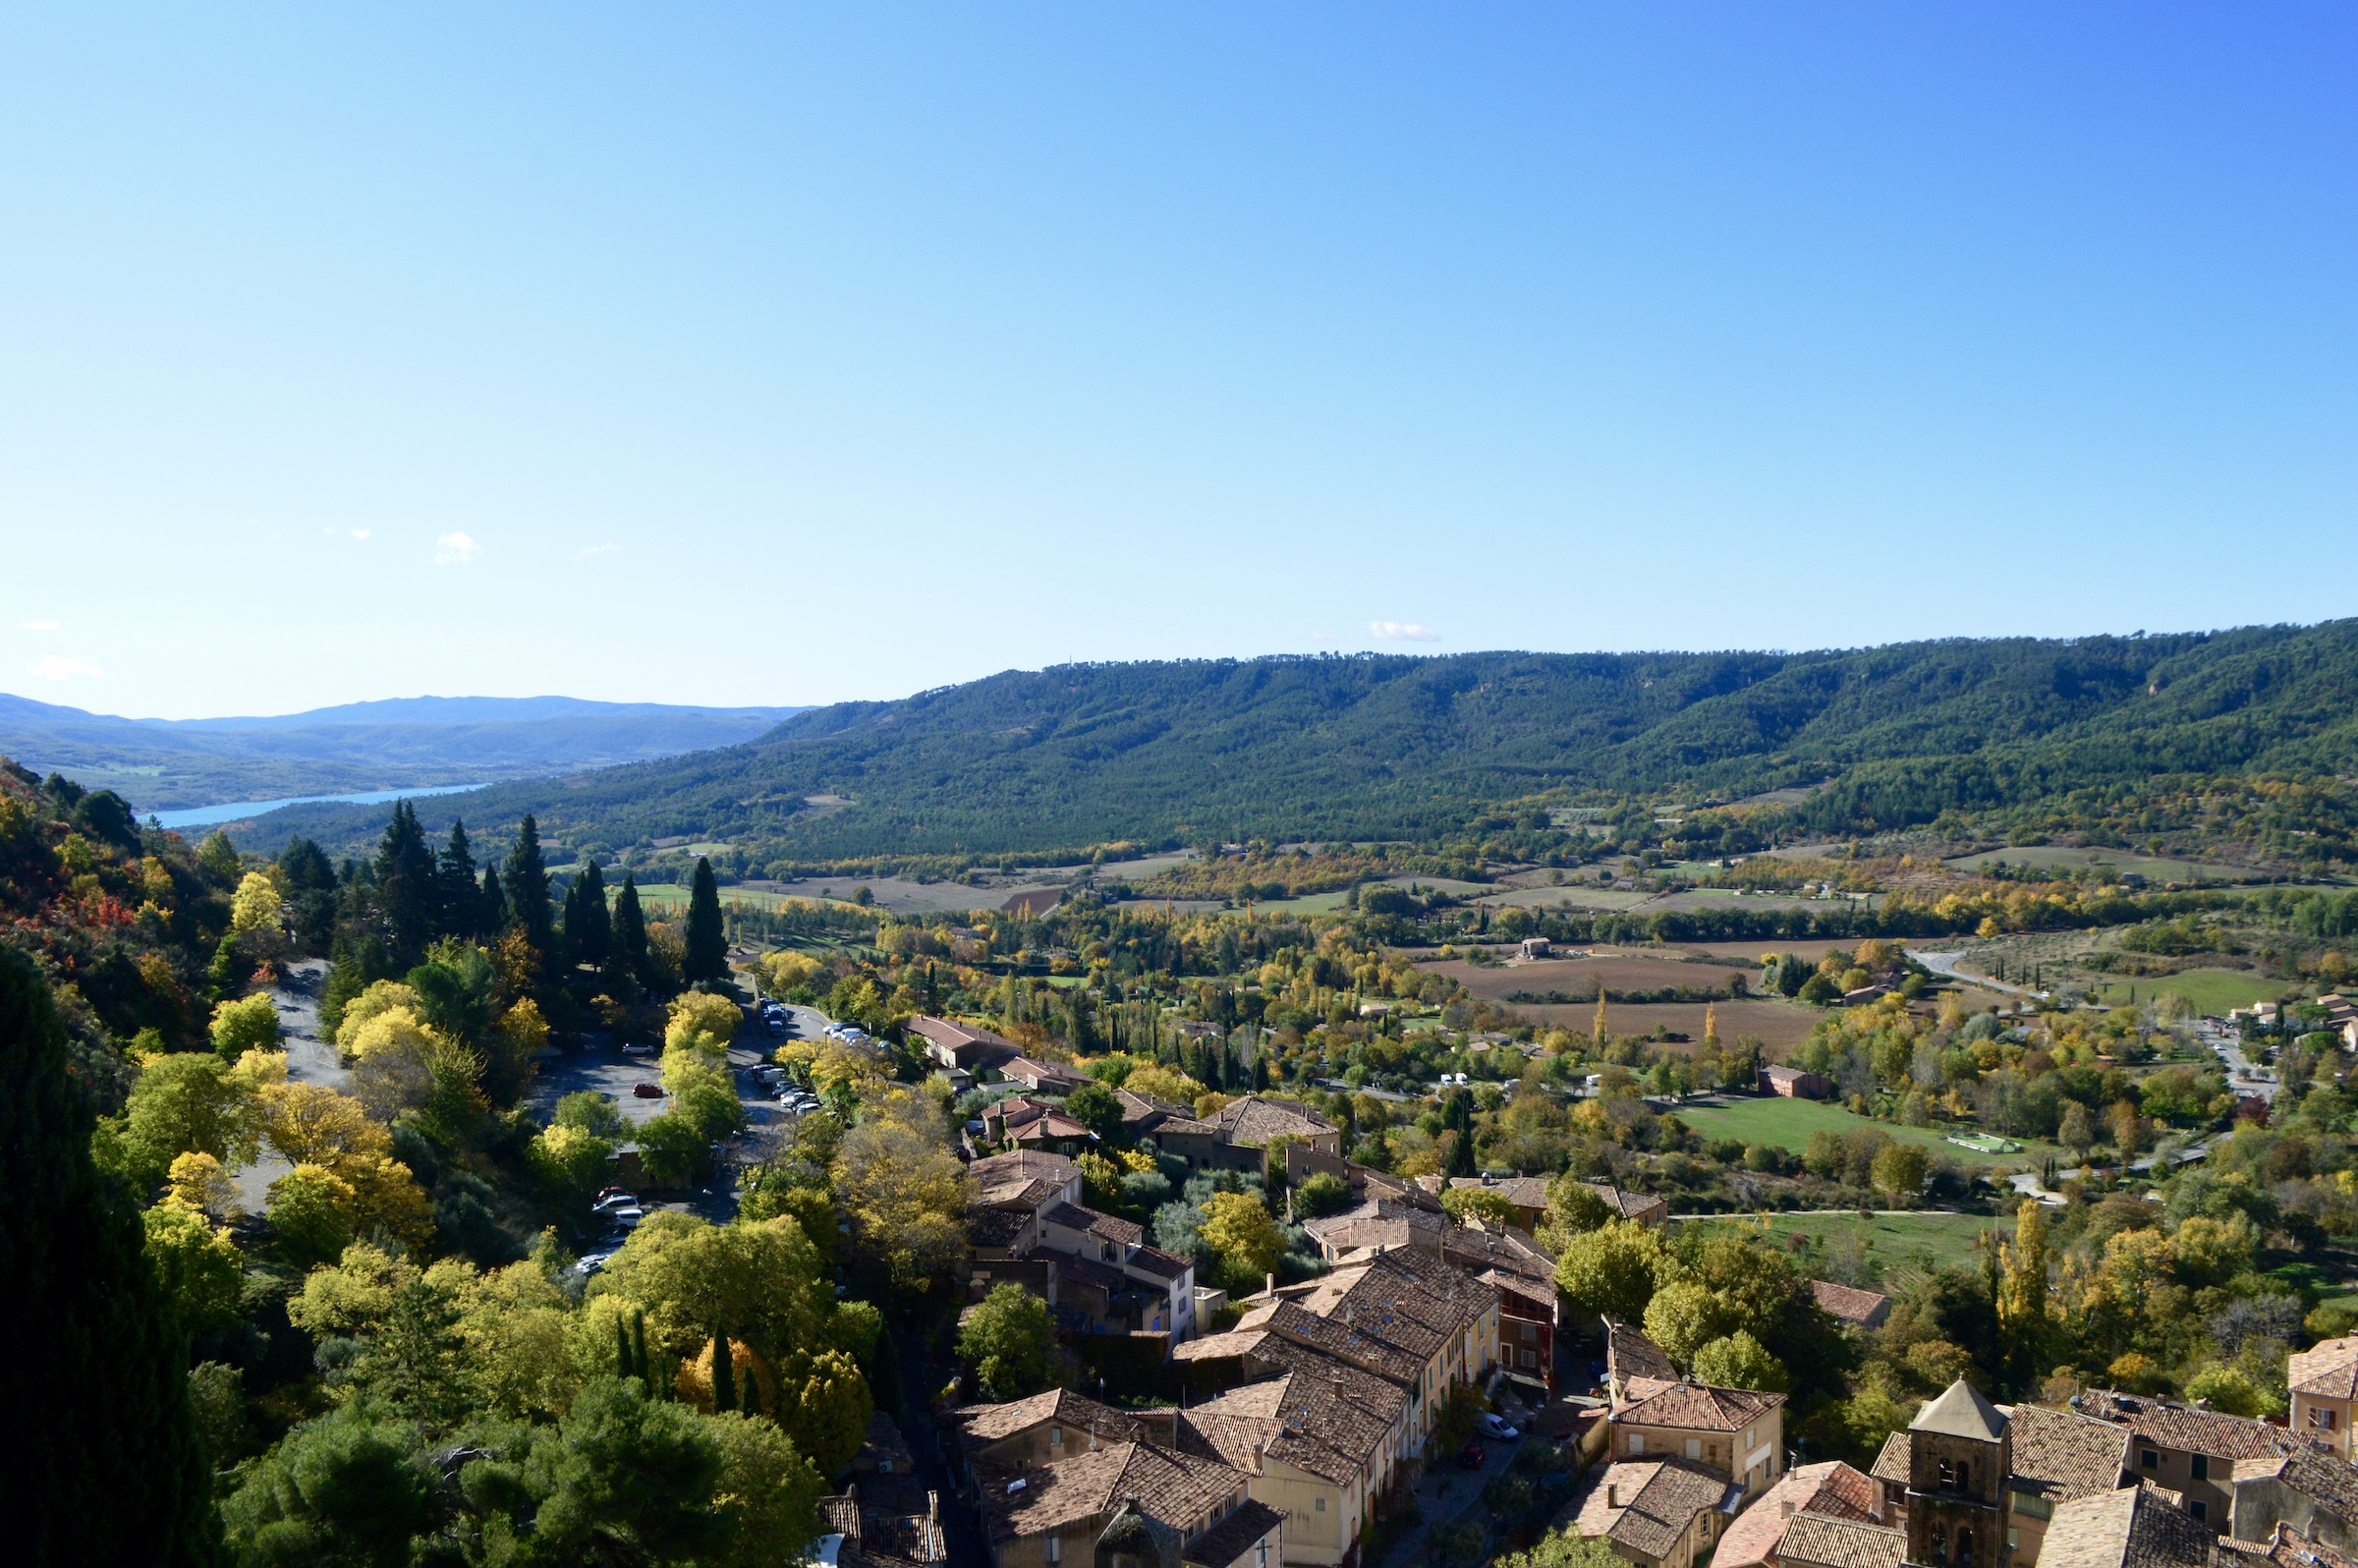 How to Spend a Weekend in Moustiers-Sainte-Marie